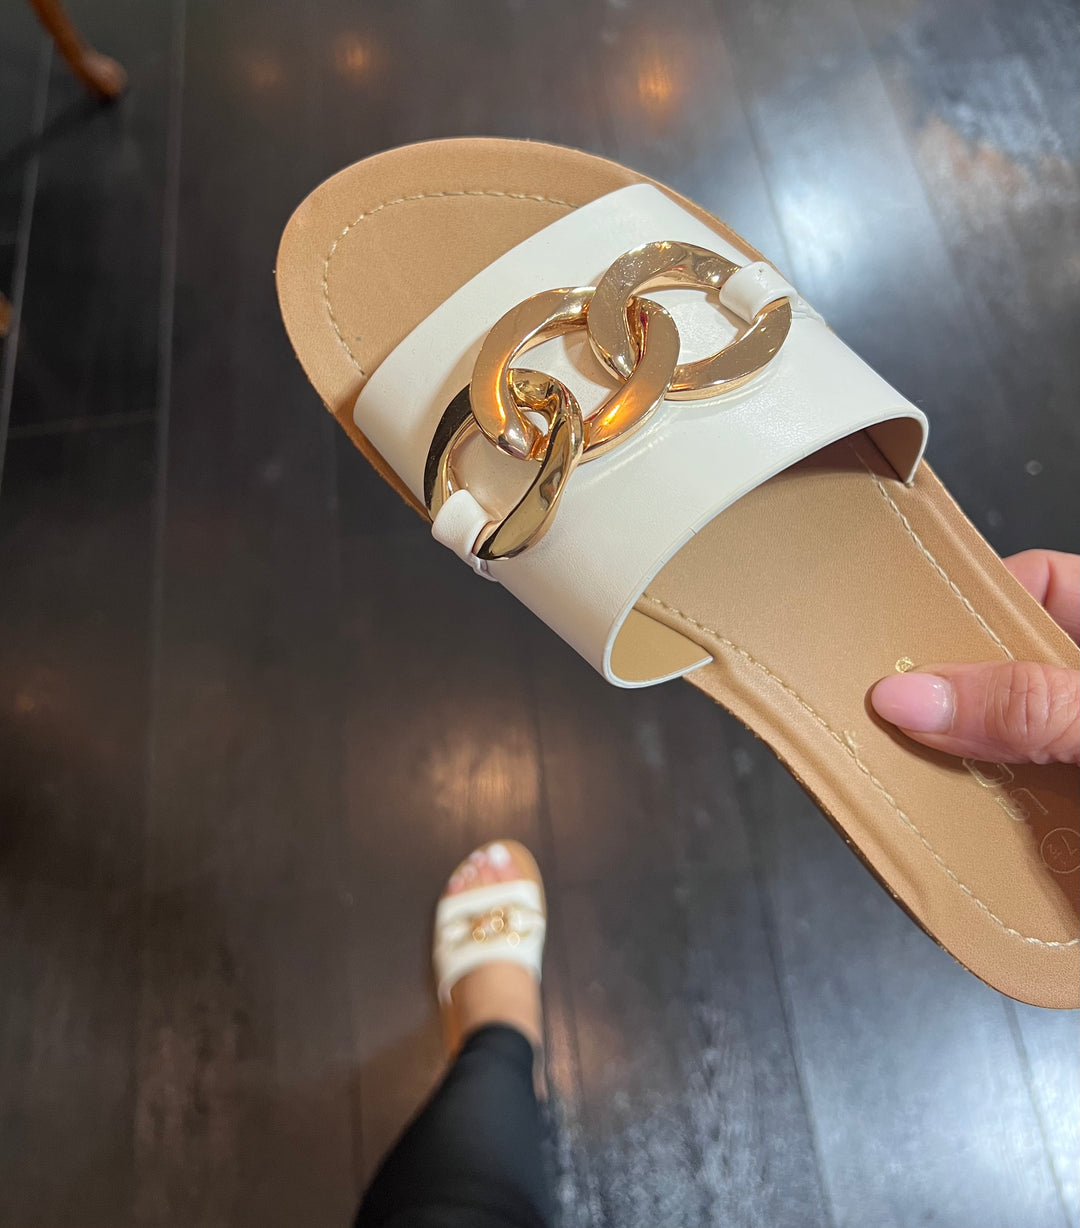 Ageless White Slide on Sandal w/Gold Chain Accent